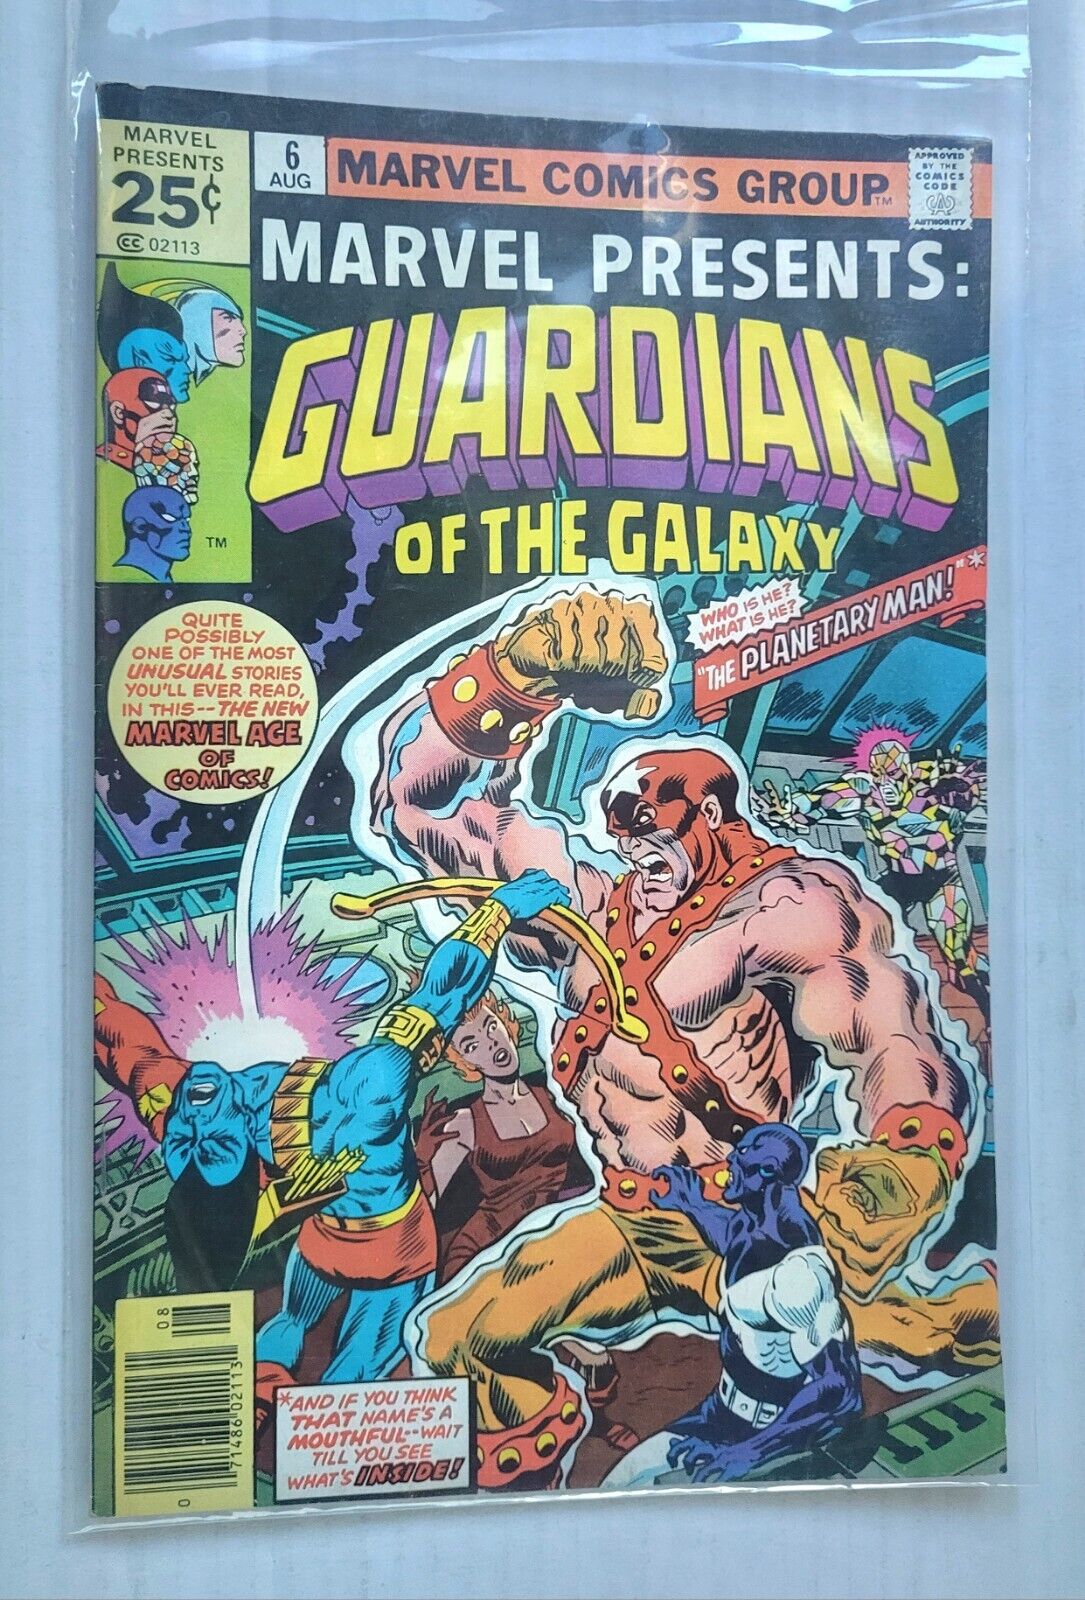 Marvel Presents: Guardians of the Galaxy #6 (1976) Good+ Marvel Comics Group